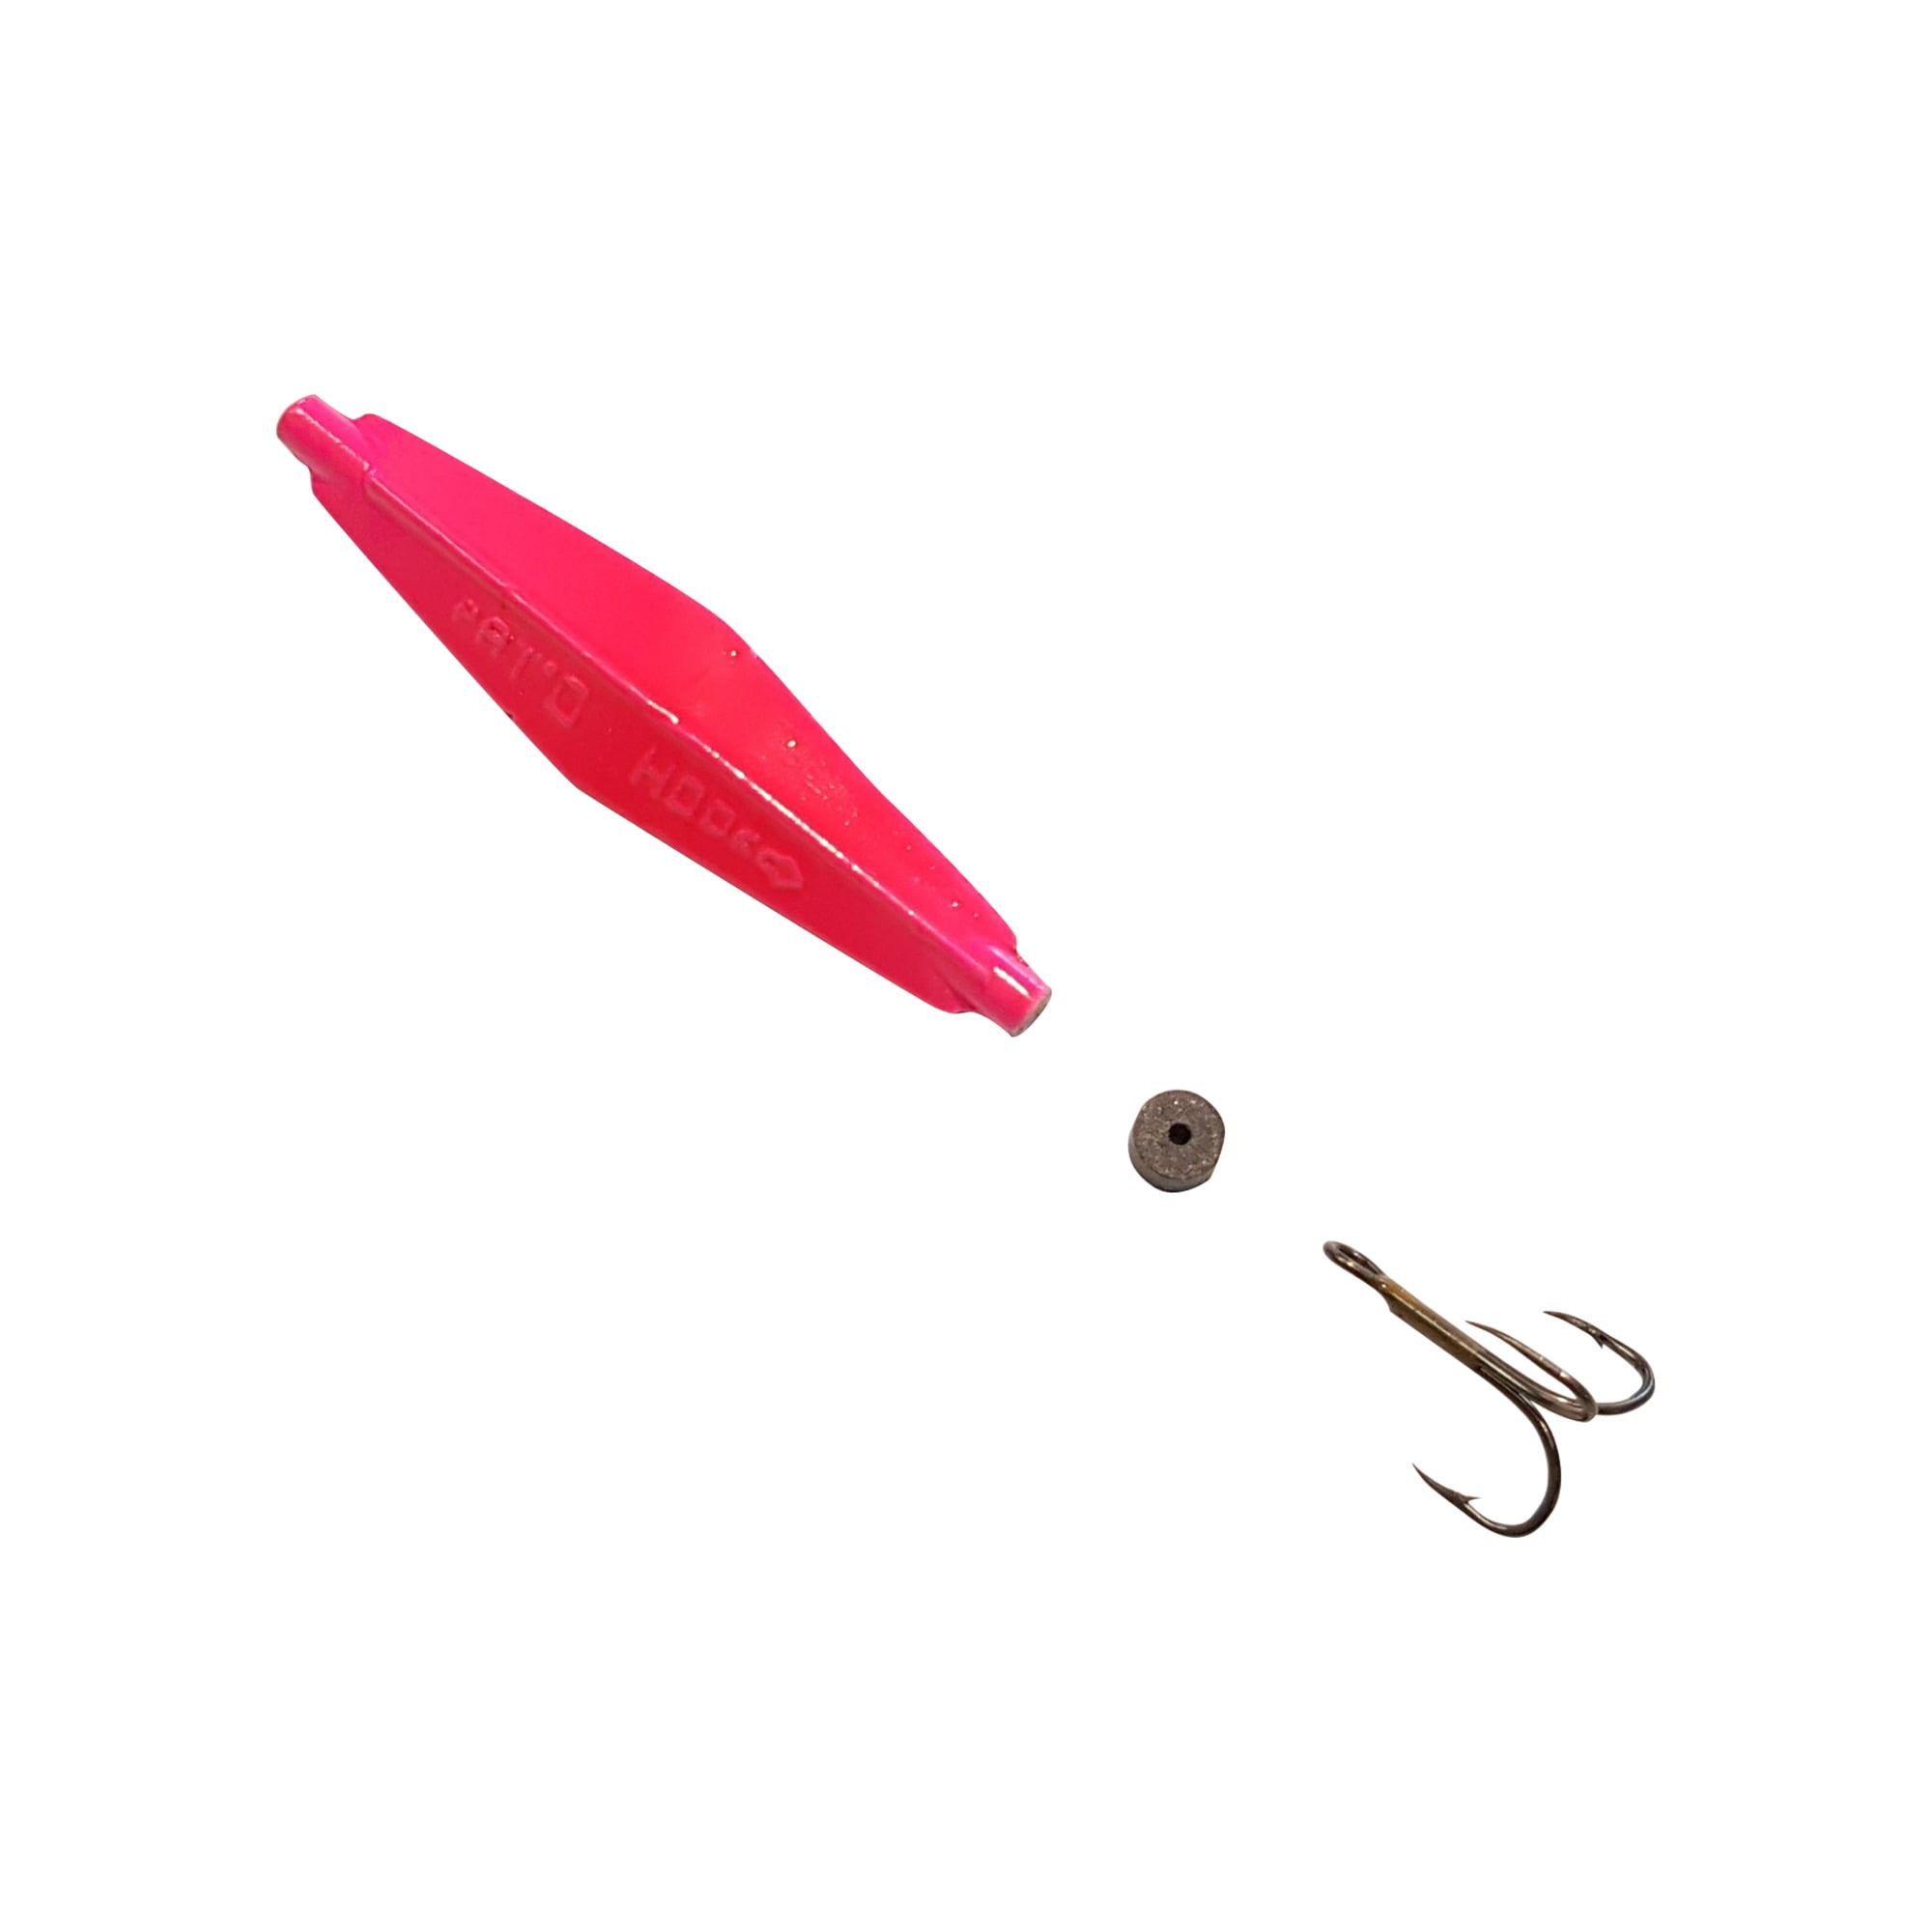 Buzz Bomb Fishing Lures Tackle Gear Pink Pearl Pick Of Size